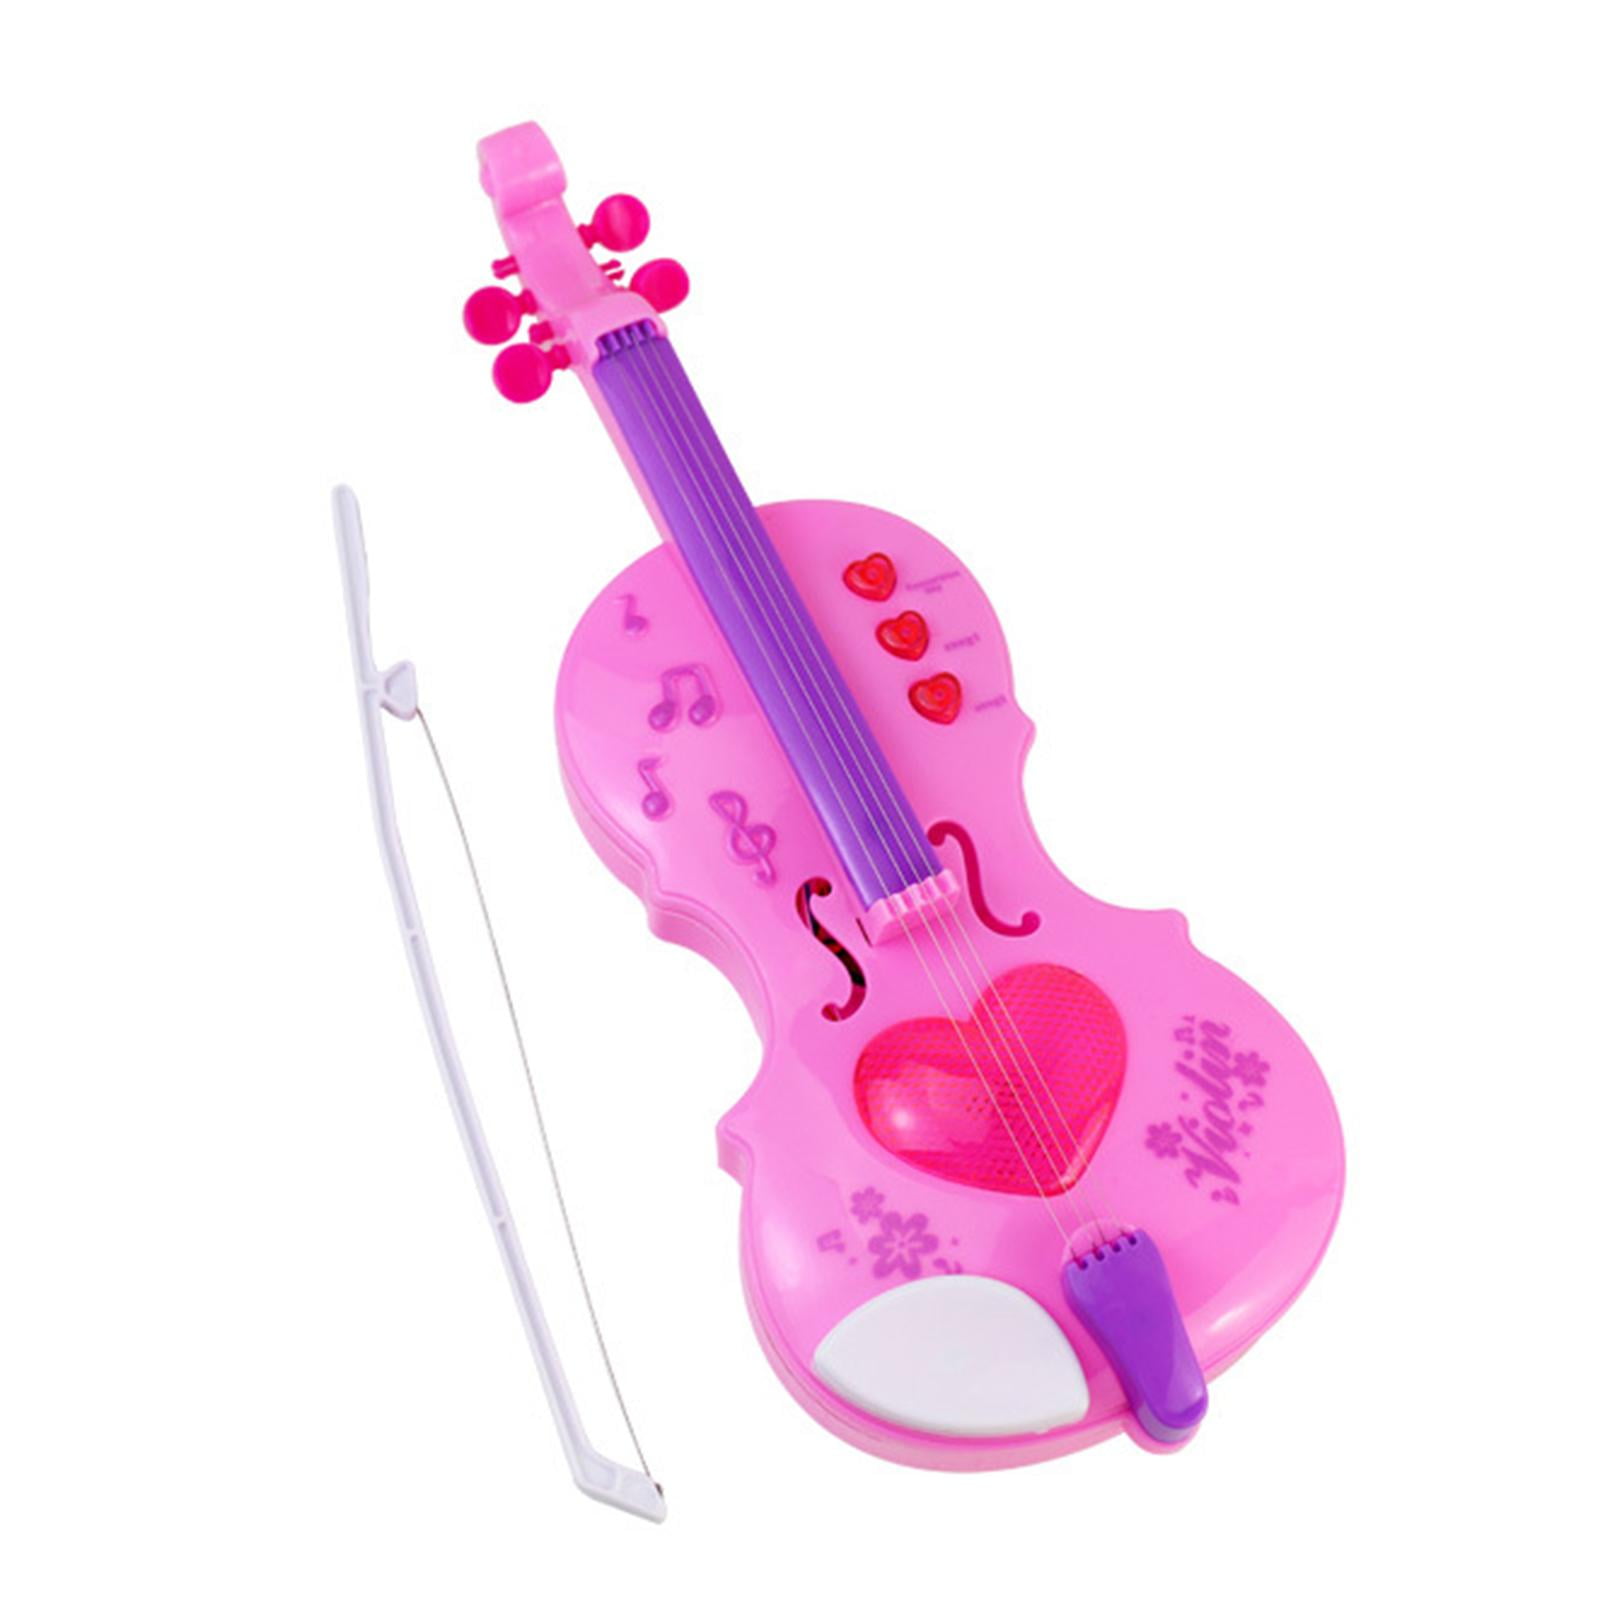 HMANE Electric Violin Toys Musical Instruments Toy with Light and Sound for Kids Boys and Girls Pink Best Gifts for Children